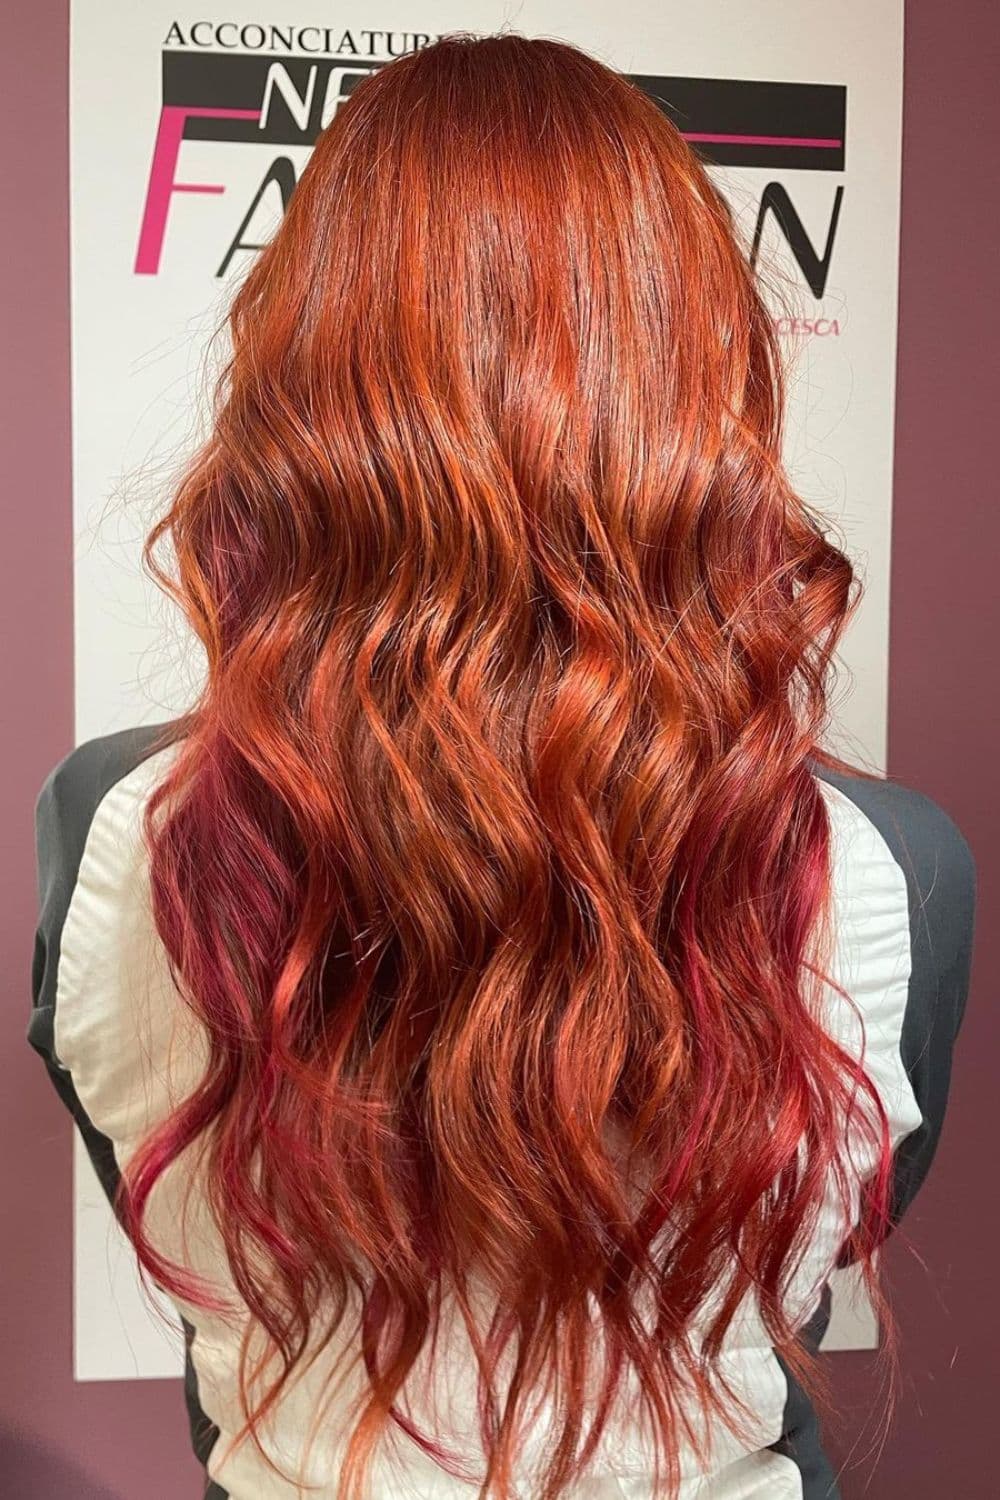 A woman with long ginger red hair with curls.